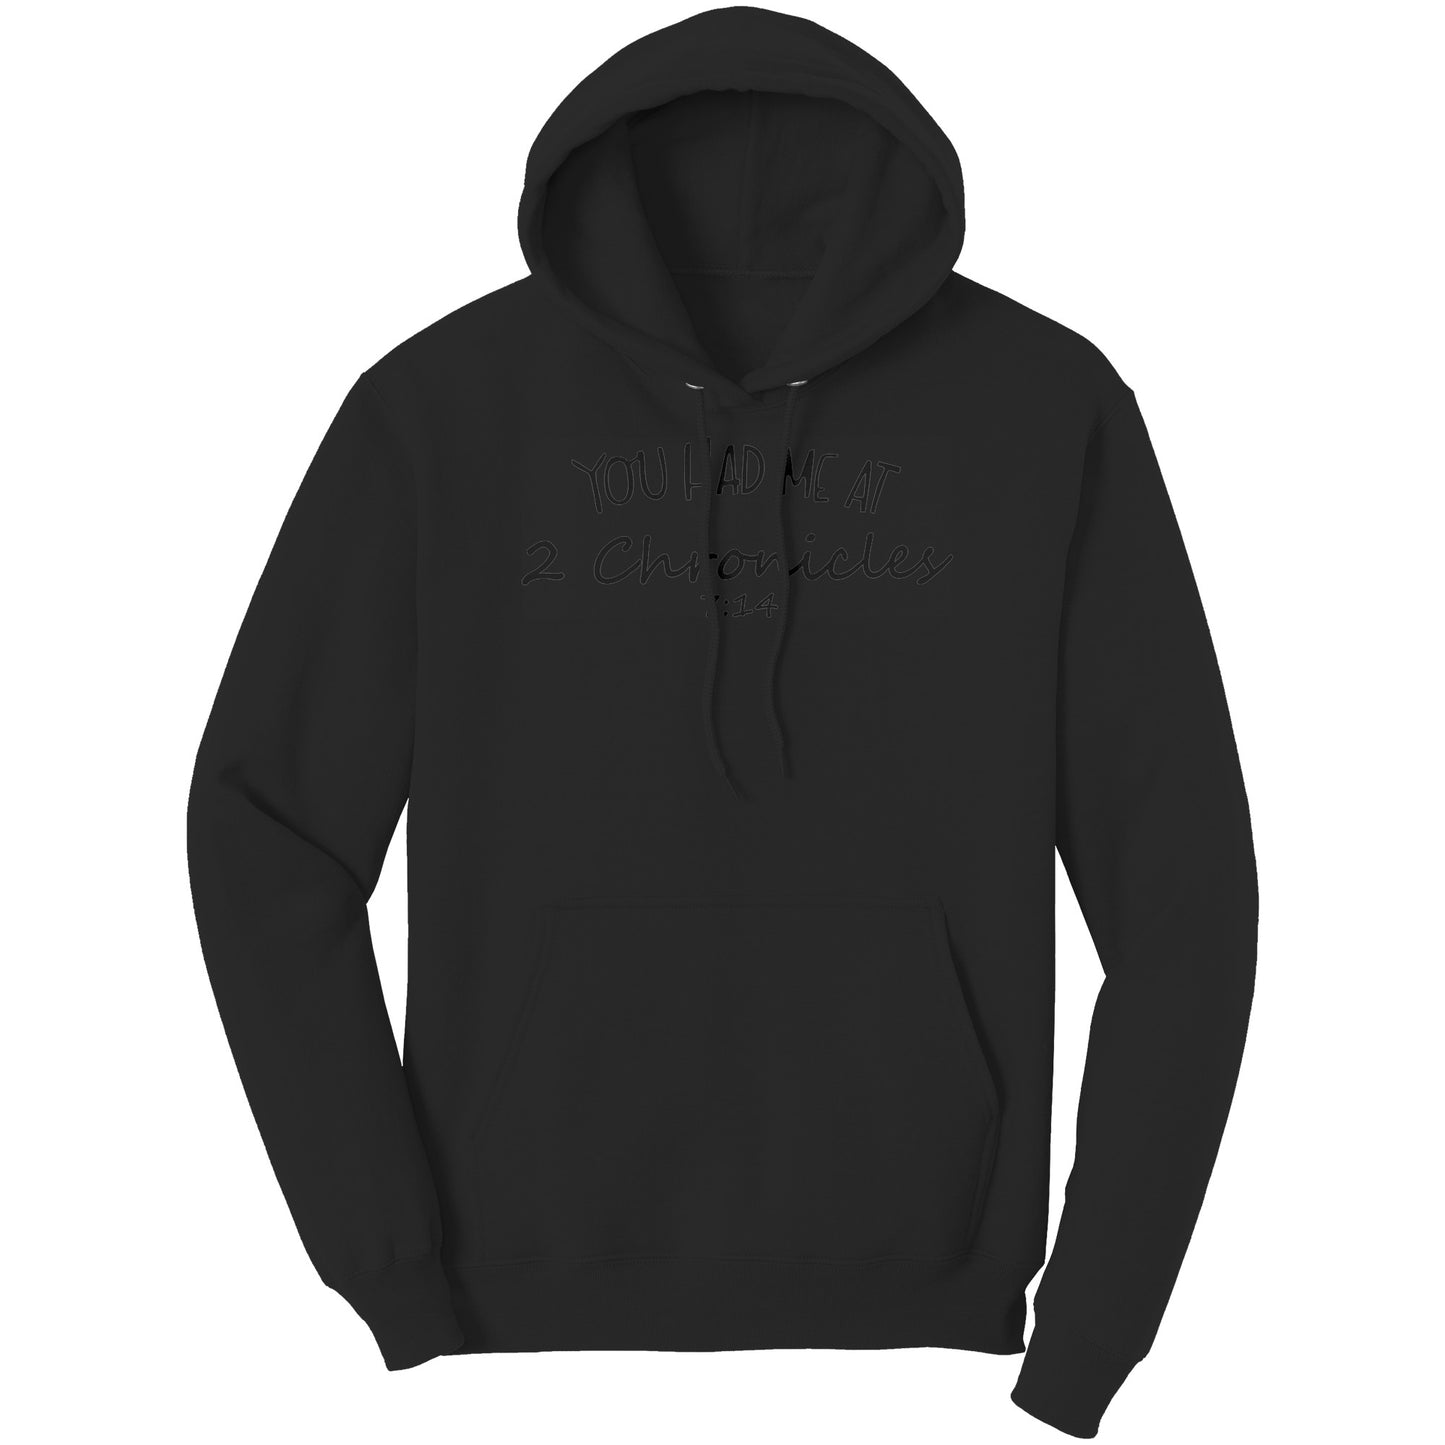 You Had Me At 2 Chronicles 7:14 Hoodie Part 1